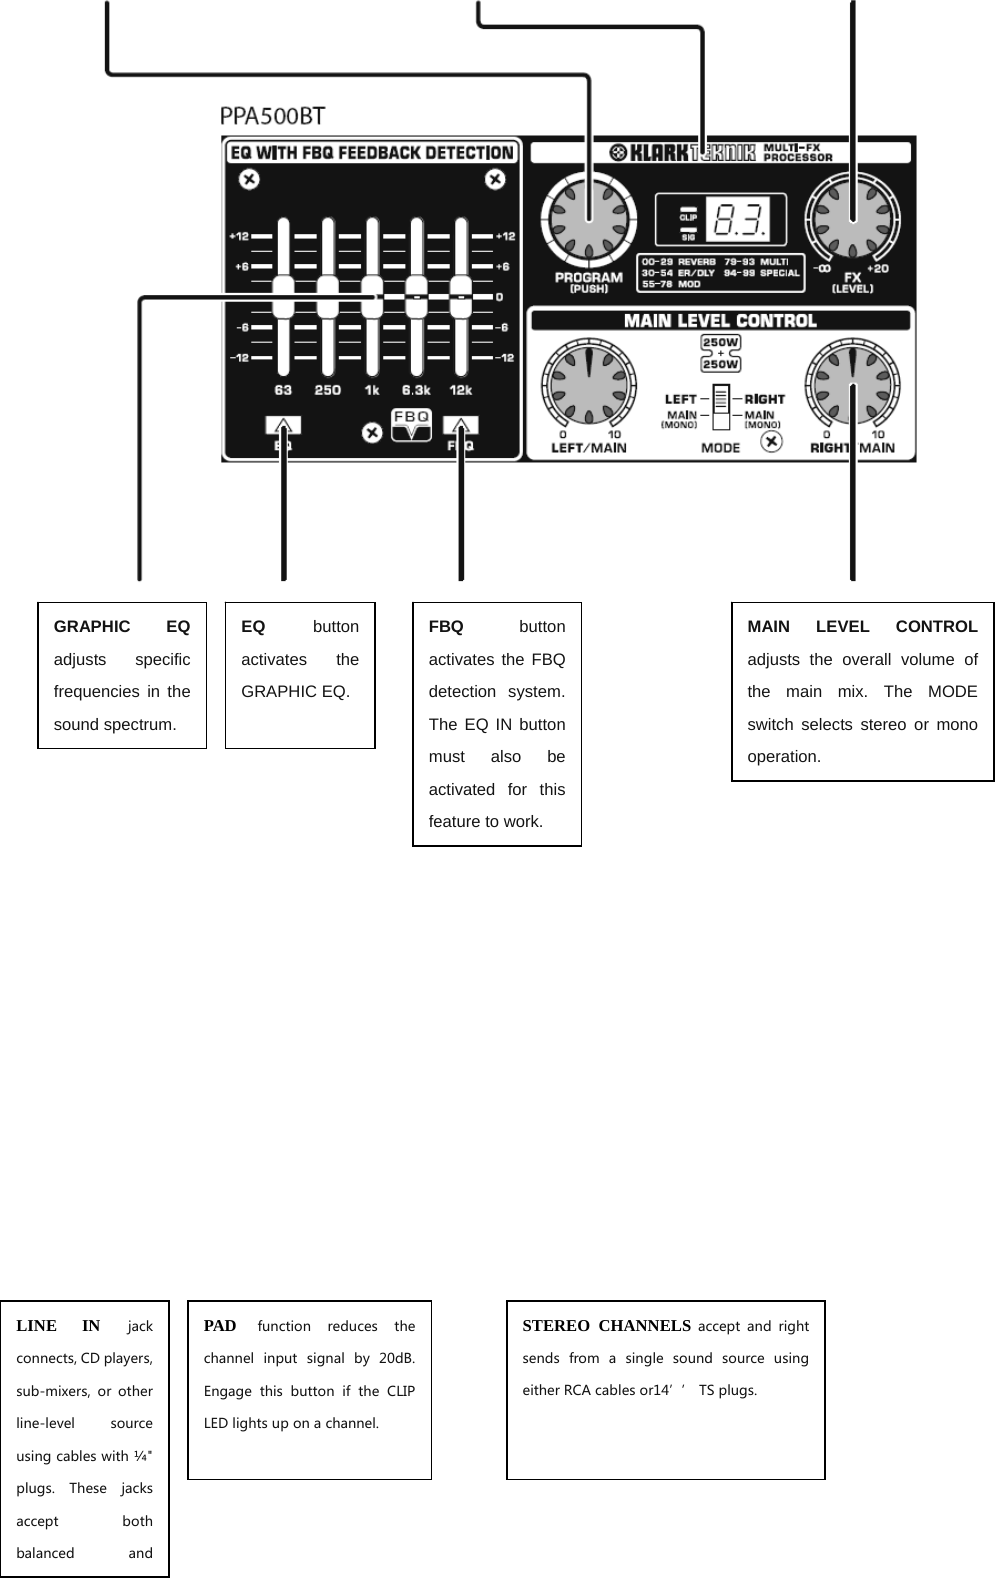                           GRAPHIC EQ adjusts specific frequencies in the sound spectrum. EQ button activates the GRAPHIC EQ. FBQ button activates the FBQ detection system. The EQ IN button must also be activated for this feature to work. MAIN LEVEL CONTROL adjusts the overall volume of the main mix. The MODE switch selects stereo or mono operation. LINE IN jack connects, CD players, sub-mixers,  or  other line-level  source using cables with ¼&quot; plugs.  These  jacks accept  both balanced  and PAD function  reduces  the channel  input  signal  by  20dB. Engage  this  button  if  the  CLIP LED lights up on a channel. STEREO CHANNELS accept and right sends  from  a  single  sound  source  using either RCA cables or14’’ TS plugs. 